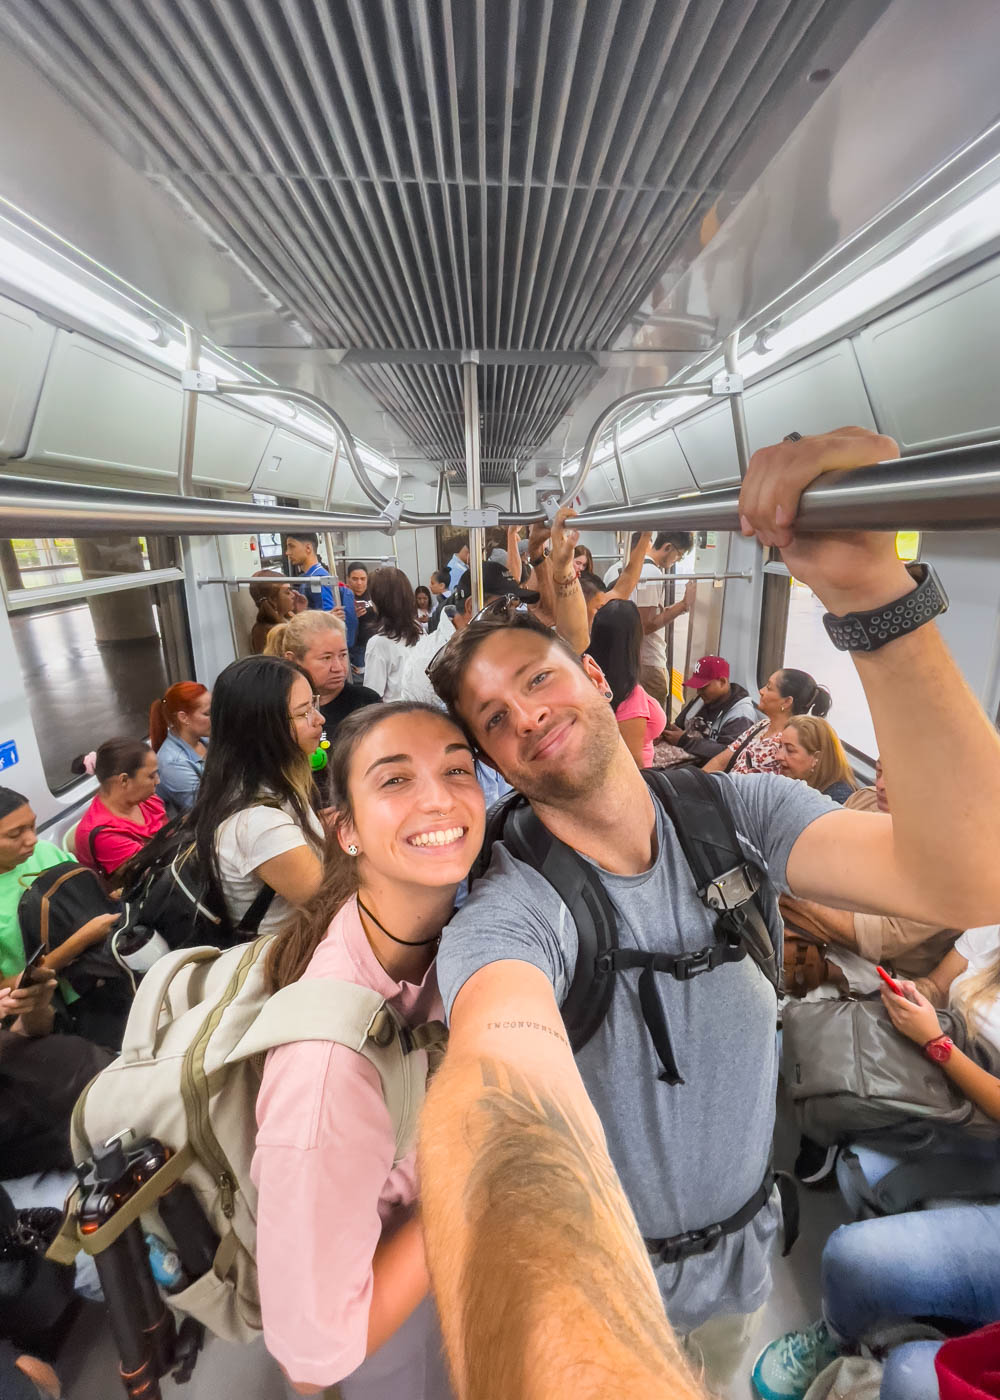 Ryan and Sara taking a selfie inside a busy carriage of the Medellin metro train.